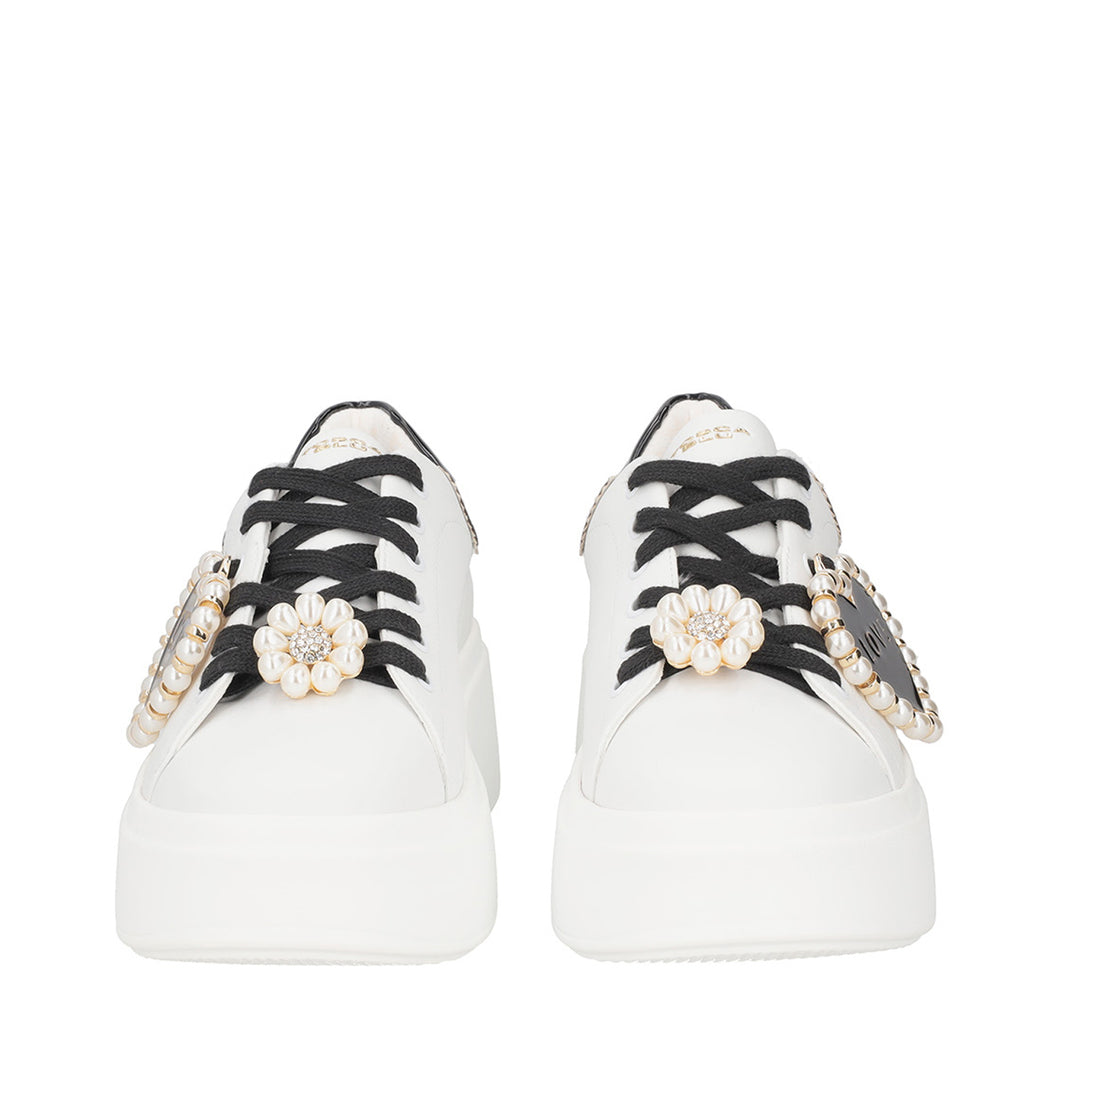 WHITE/BLACK VANITY SNEAKER WITH HEARTS AND PEARLS